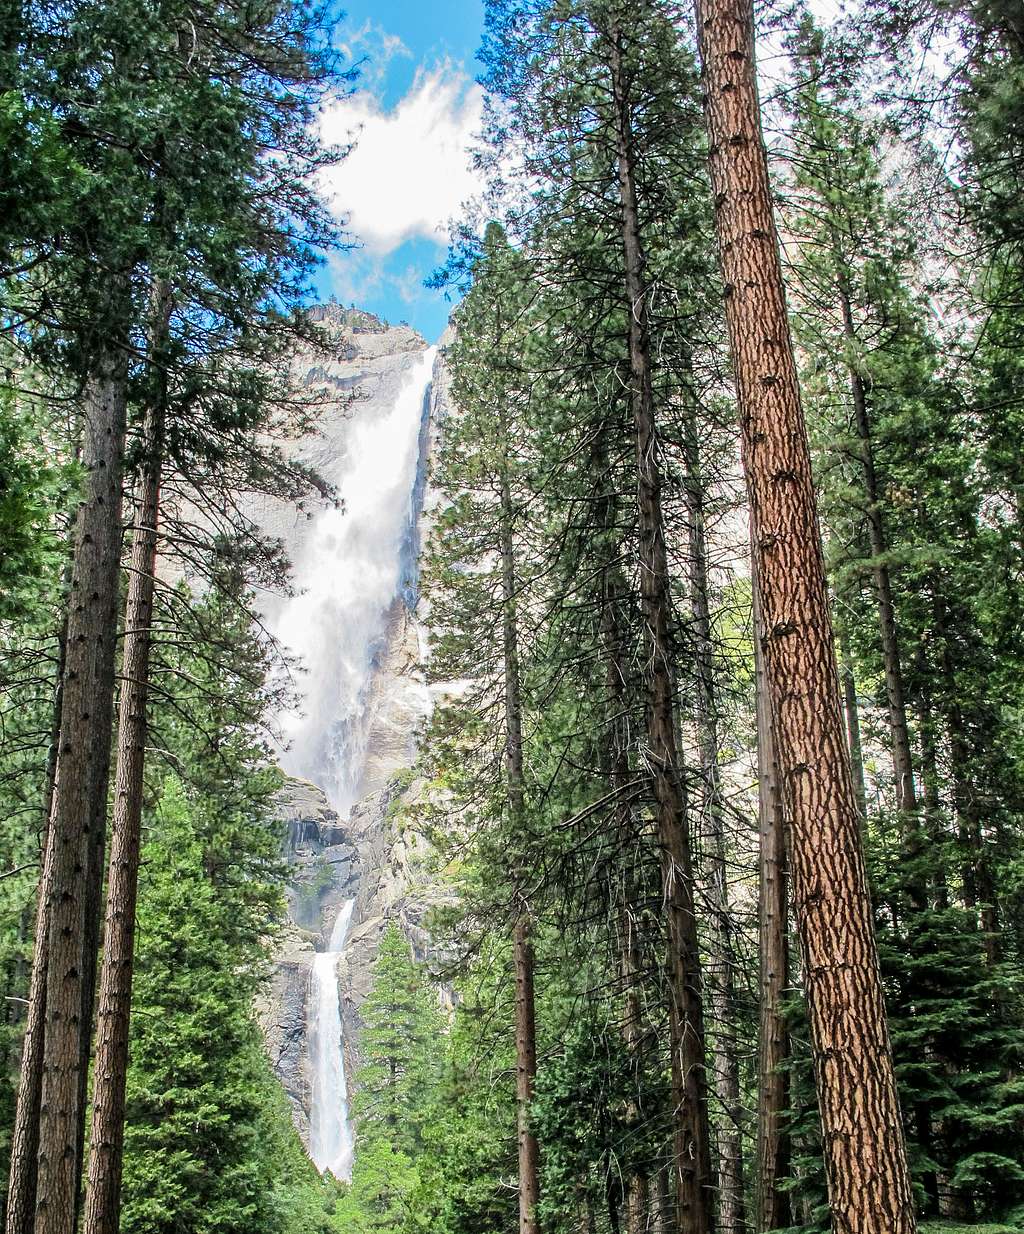 Yosemite Falls - Upper, Middle and Lower